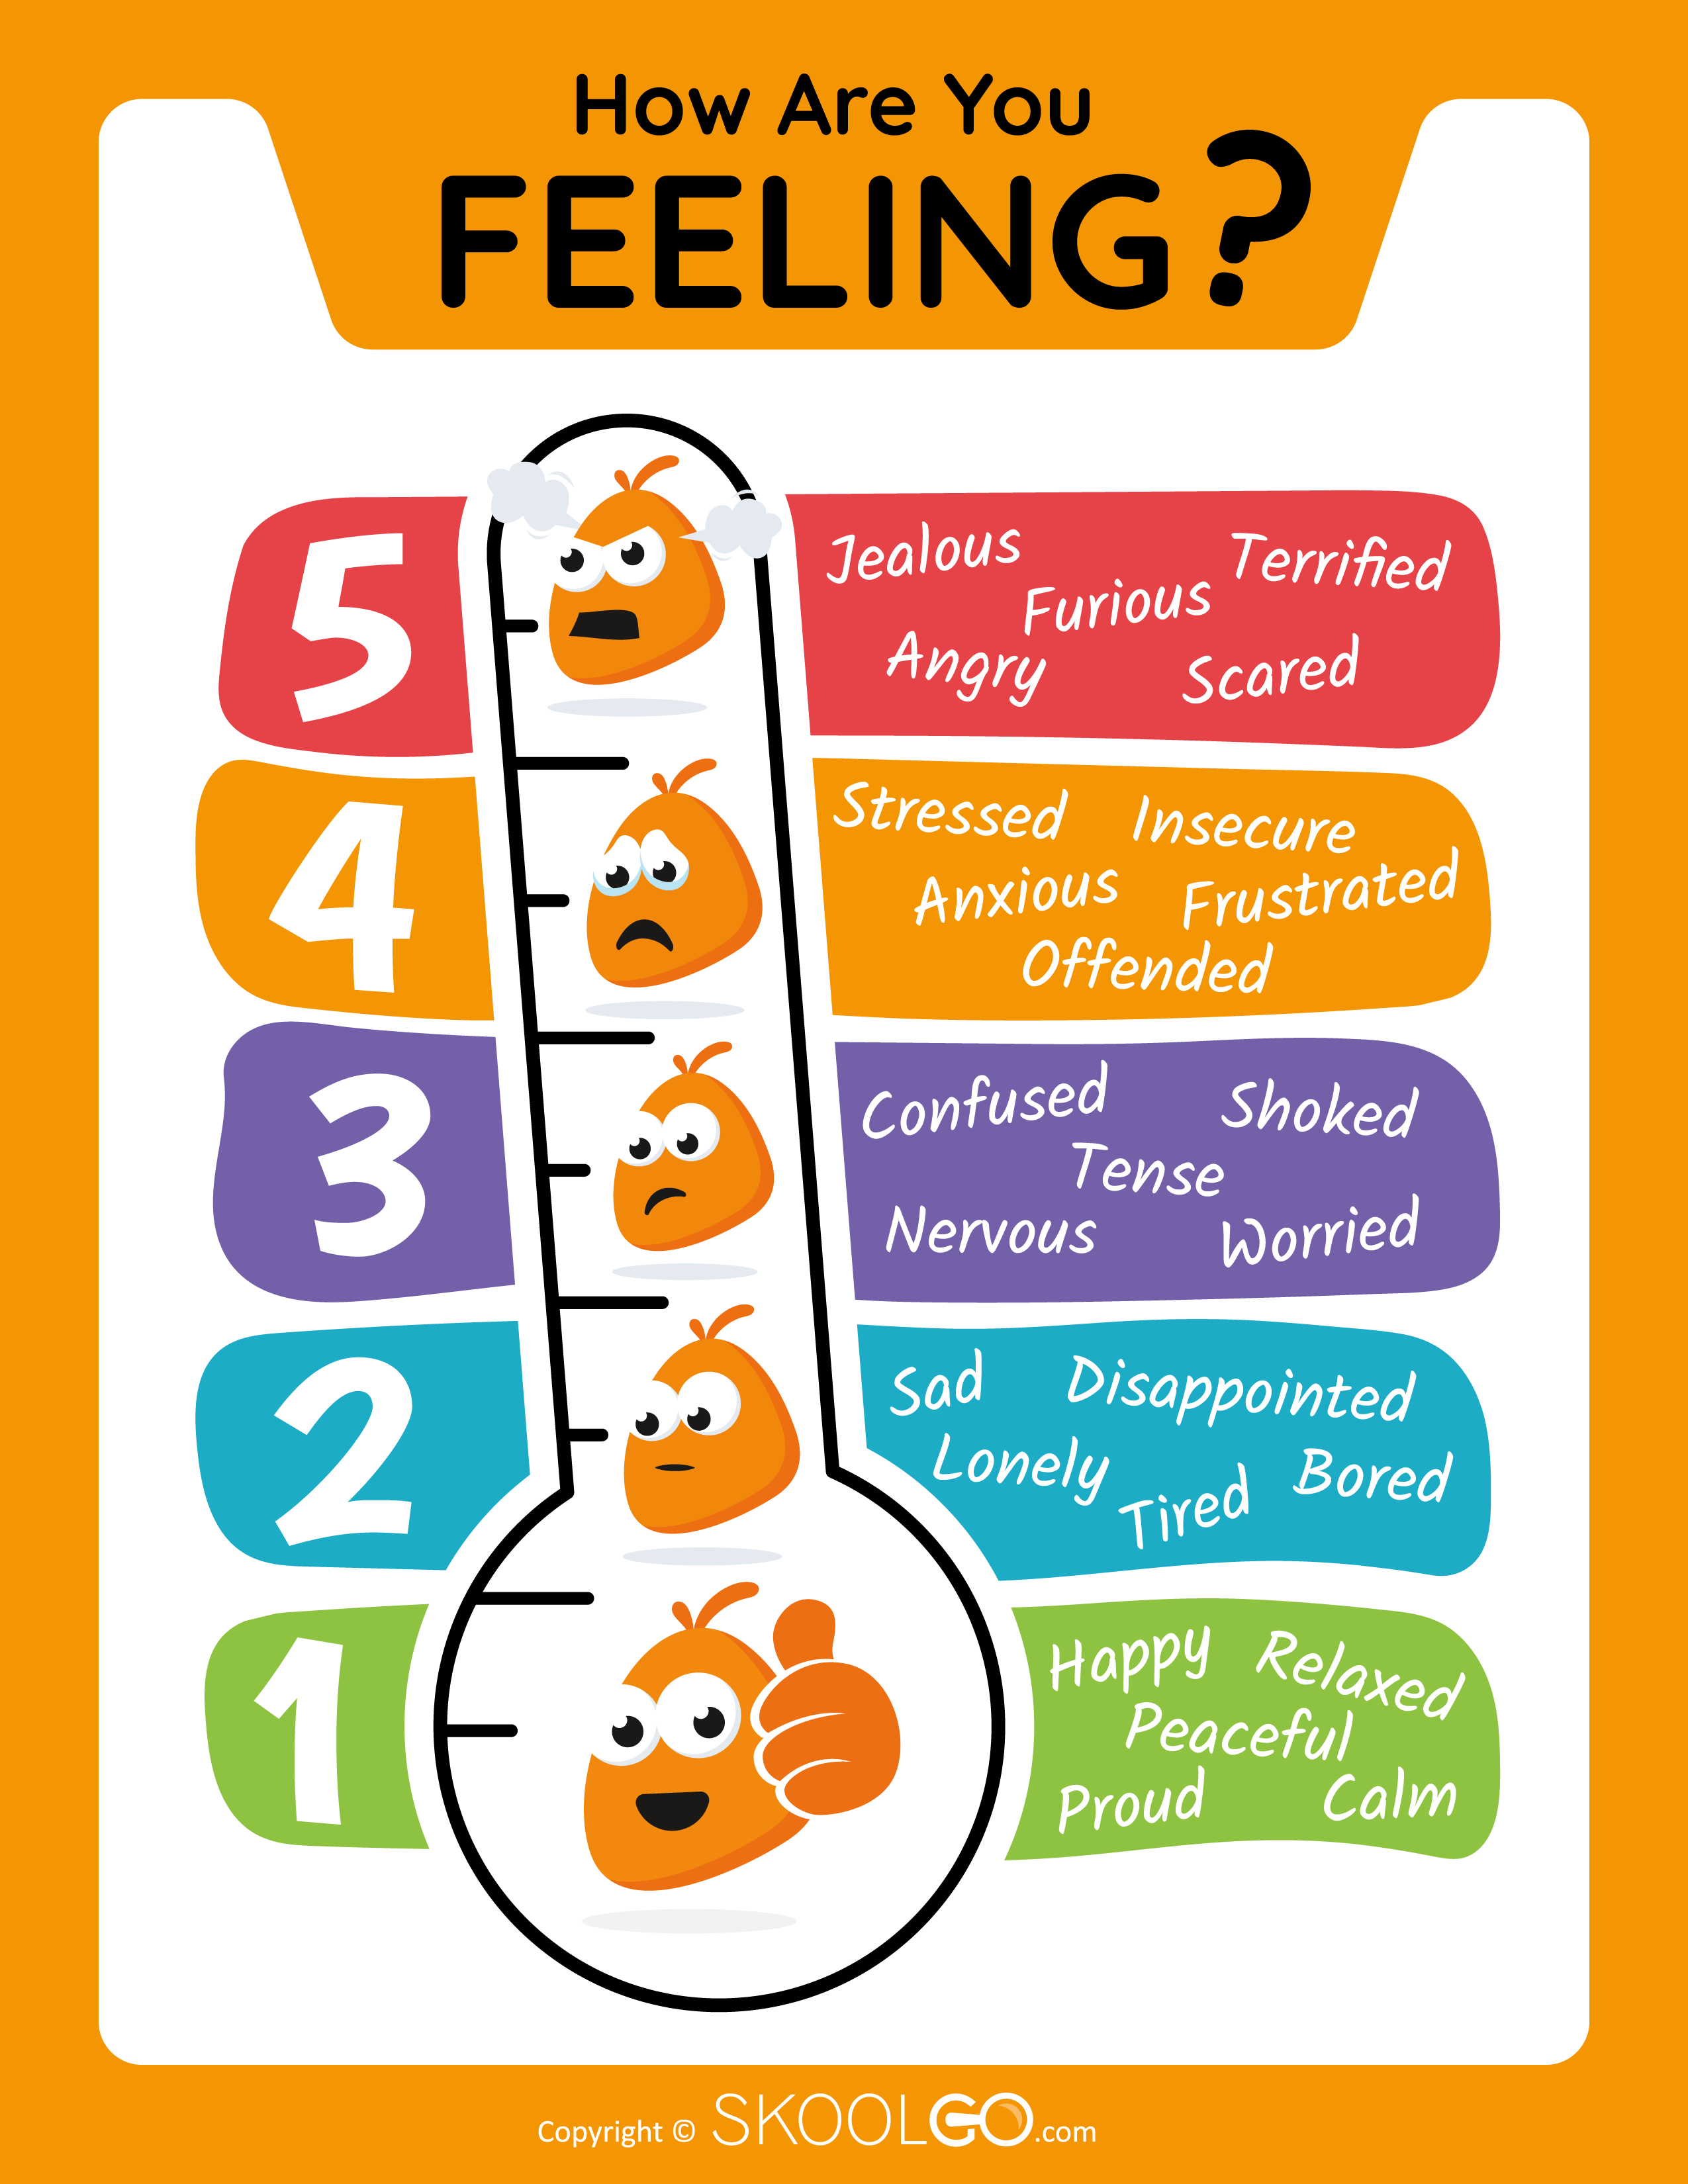 How Are You Feeling - Free Classroom Poster